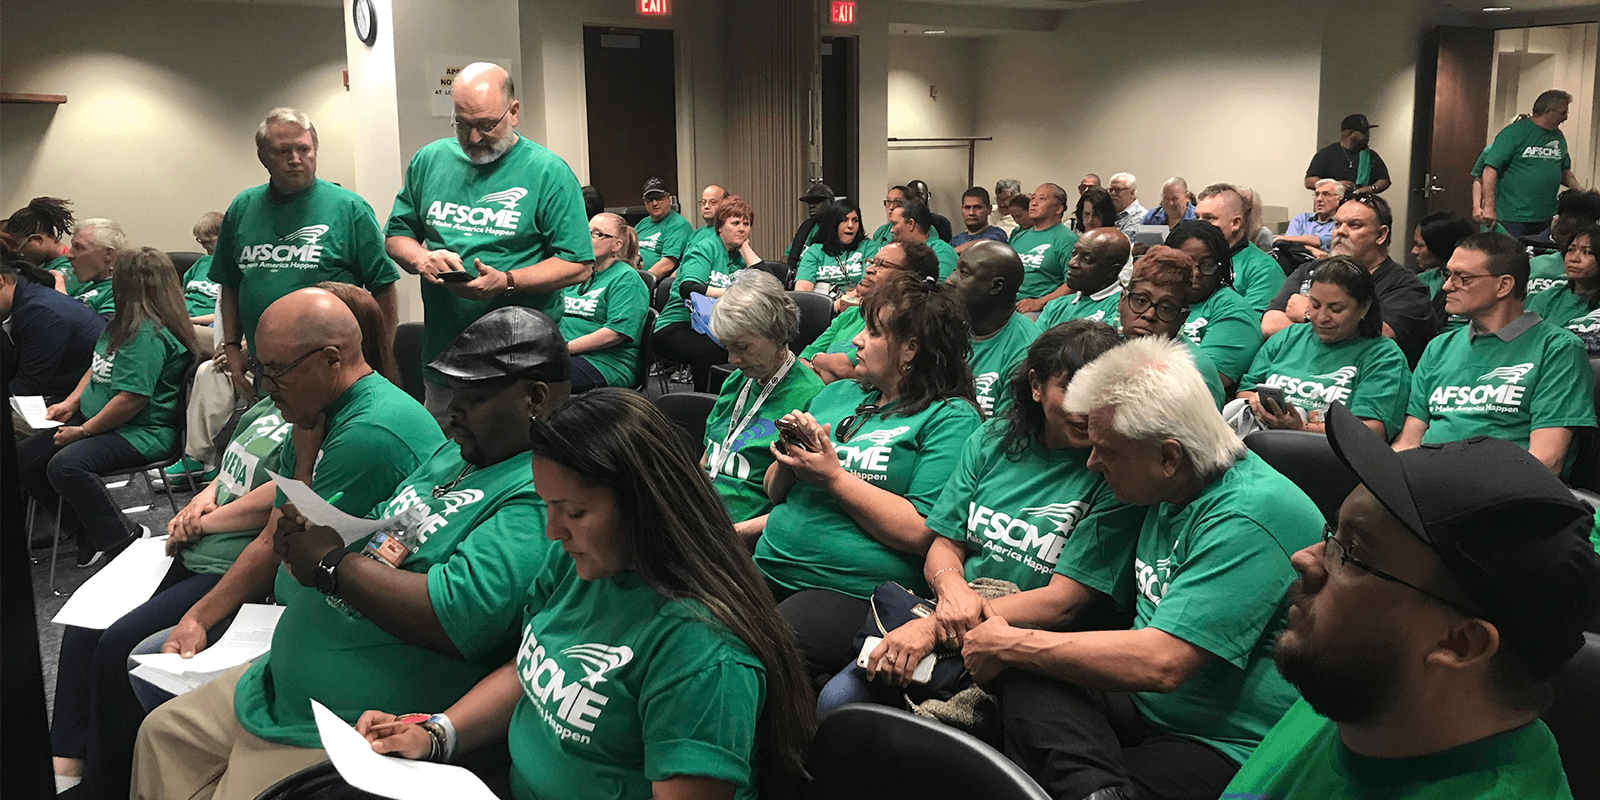 Workers Tell NV Lawmakers Why Collective Bargaining Bill is Needed